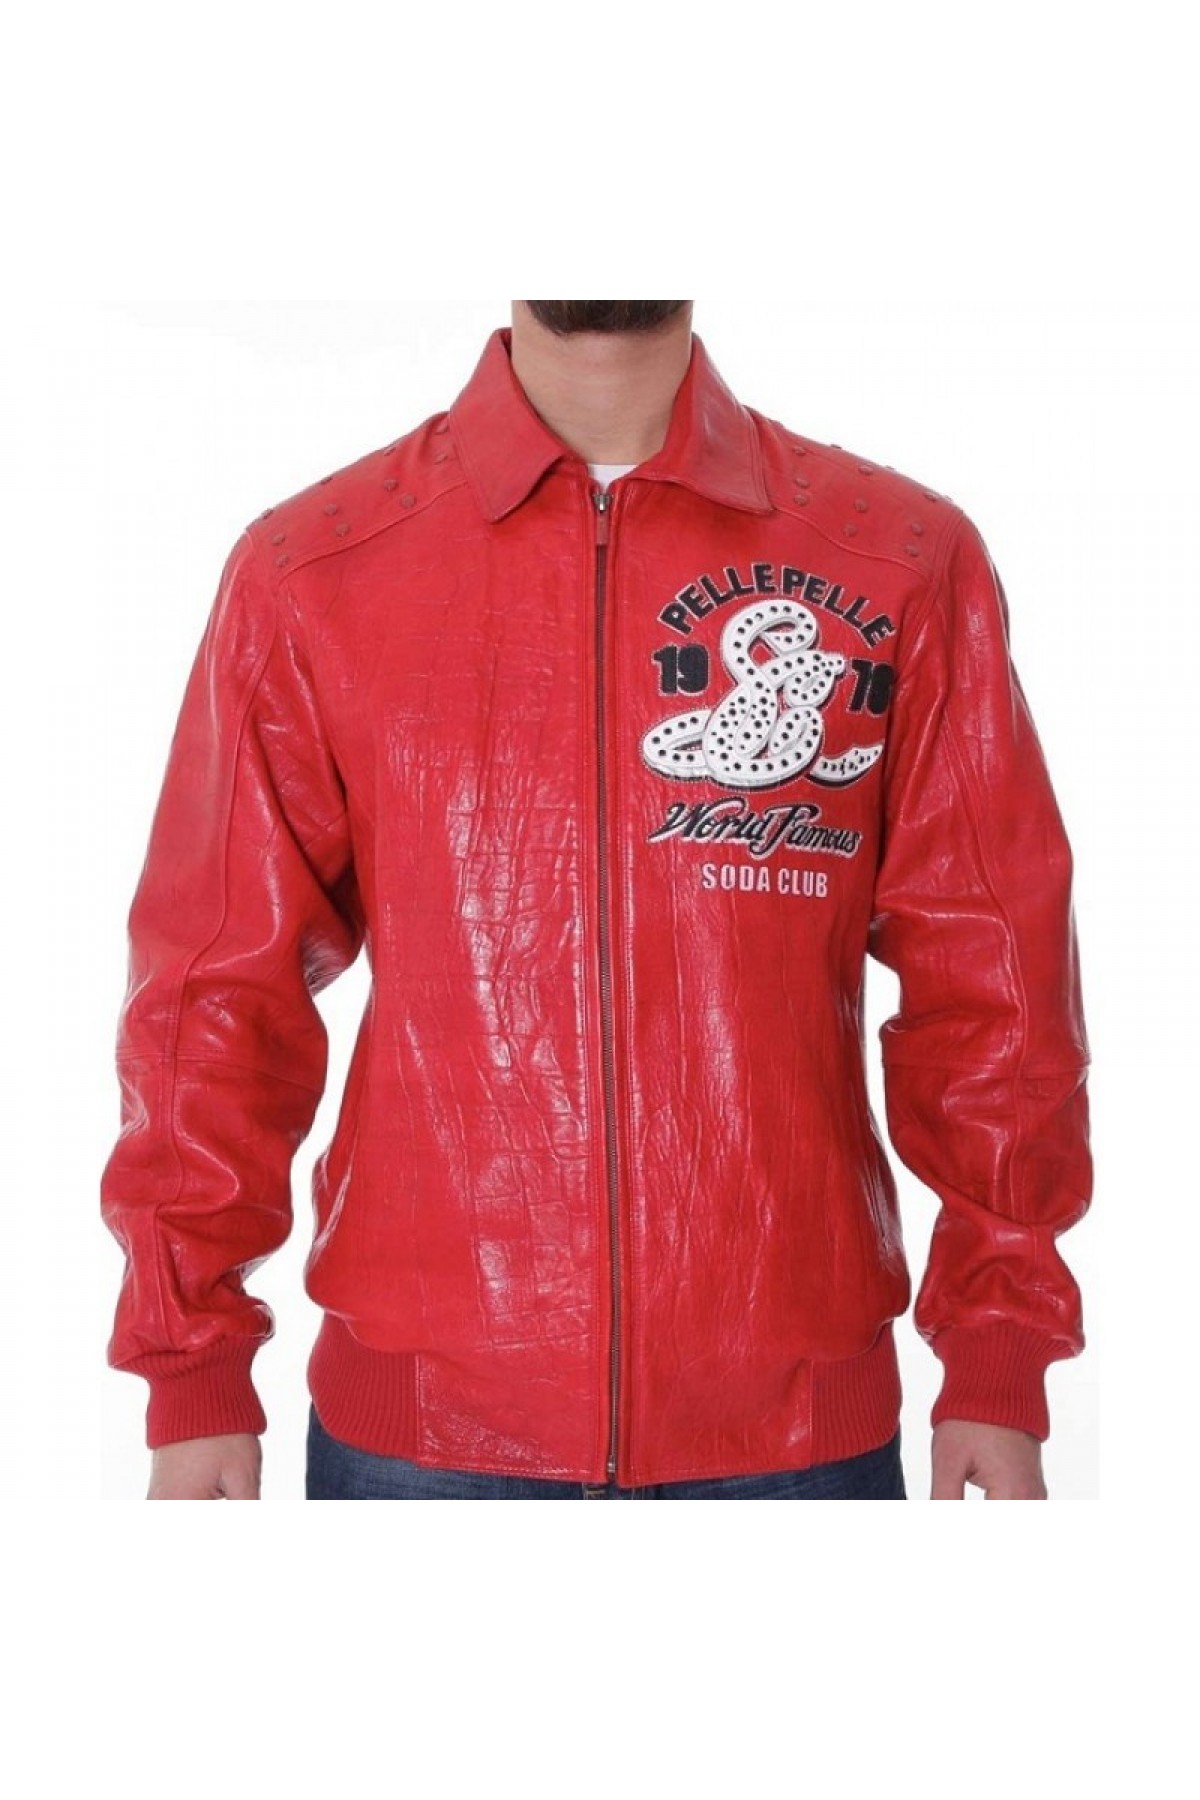 Pelle Pelle Soda Club Red Leather Jacket Front